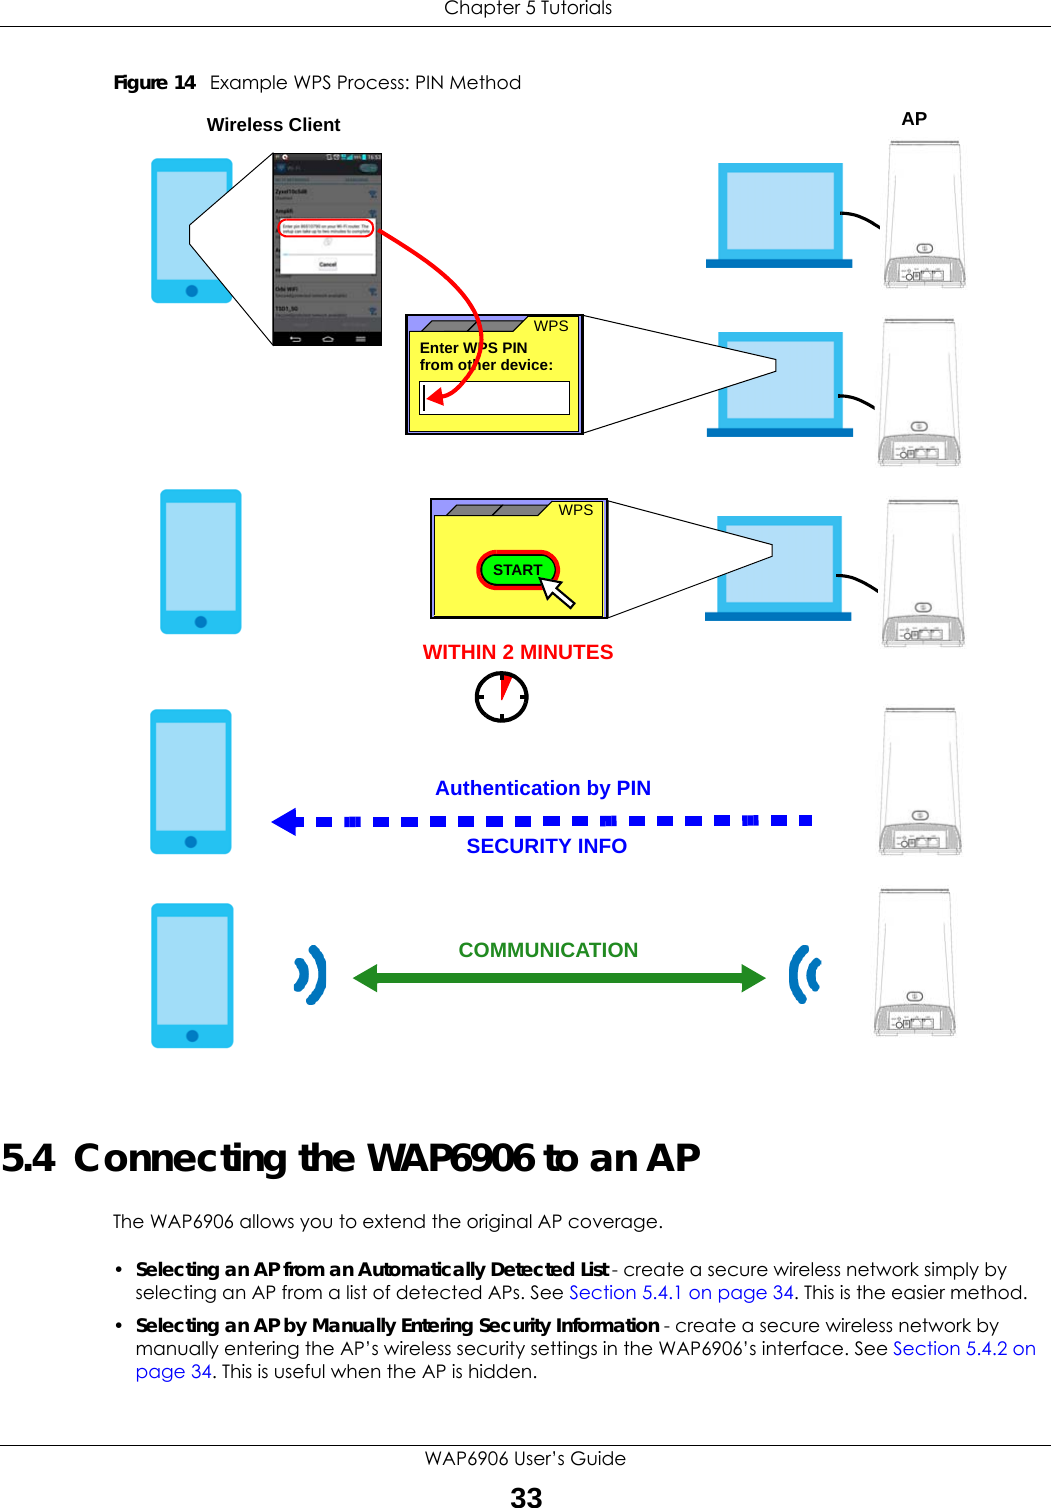  Chapter 5 TutorialsWAP6906 User’s Guide33Figure 14   Example WPS Process: PIN Method5.4  Connecting the WAP6906 to an APThe WAP6906 allows you to extend the original AP coverage.•Selecting an AP from an Automatically Detected List - create a secure wireless network simply by selecting an AP from a list of detected APs. See Section 5.4.1 on page 34. This is the easier method.•Selecting an AP by Manually Entering Security Information - create a secure wireless network by manually entering the AP’s wireless security settings in the WAP6906’s interface. See Section 5.4.2 on page 34. This is useful when the AP is hidden.Authentication by PINSECURITY INFOWITHIN 2 MINUTESWireless ClientCOMMUNICATIONEnter WPS PIN  WPSfrom other device: WPSSTARTAP